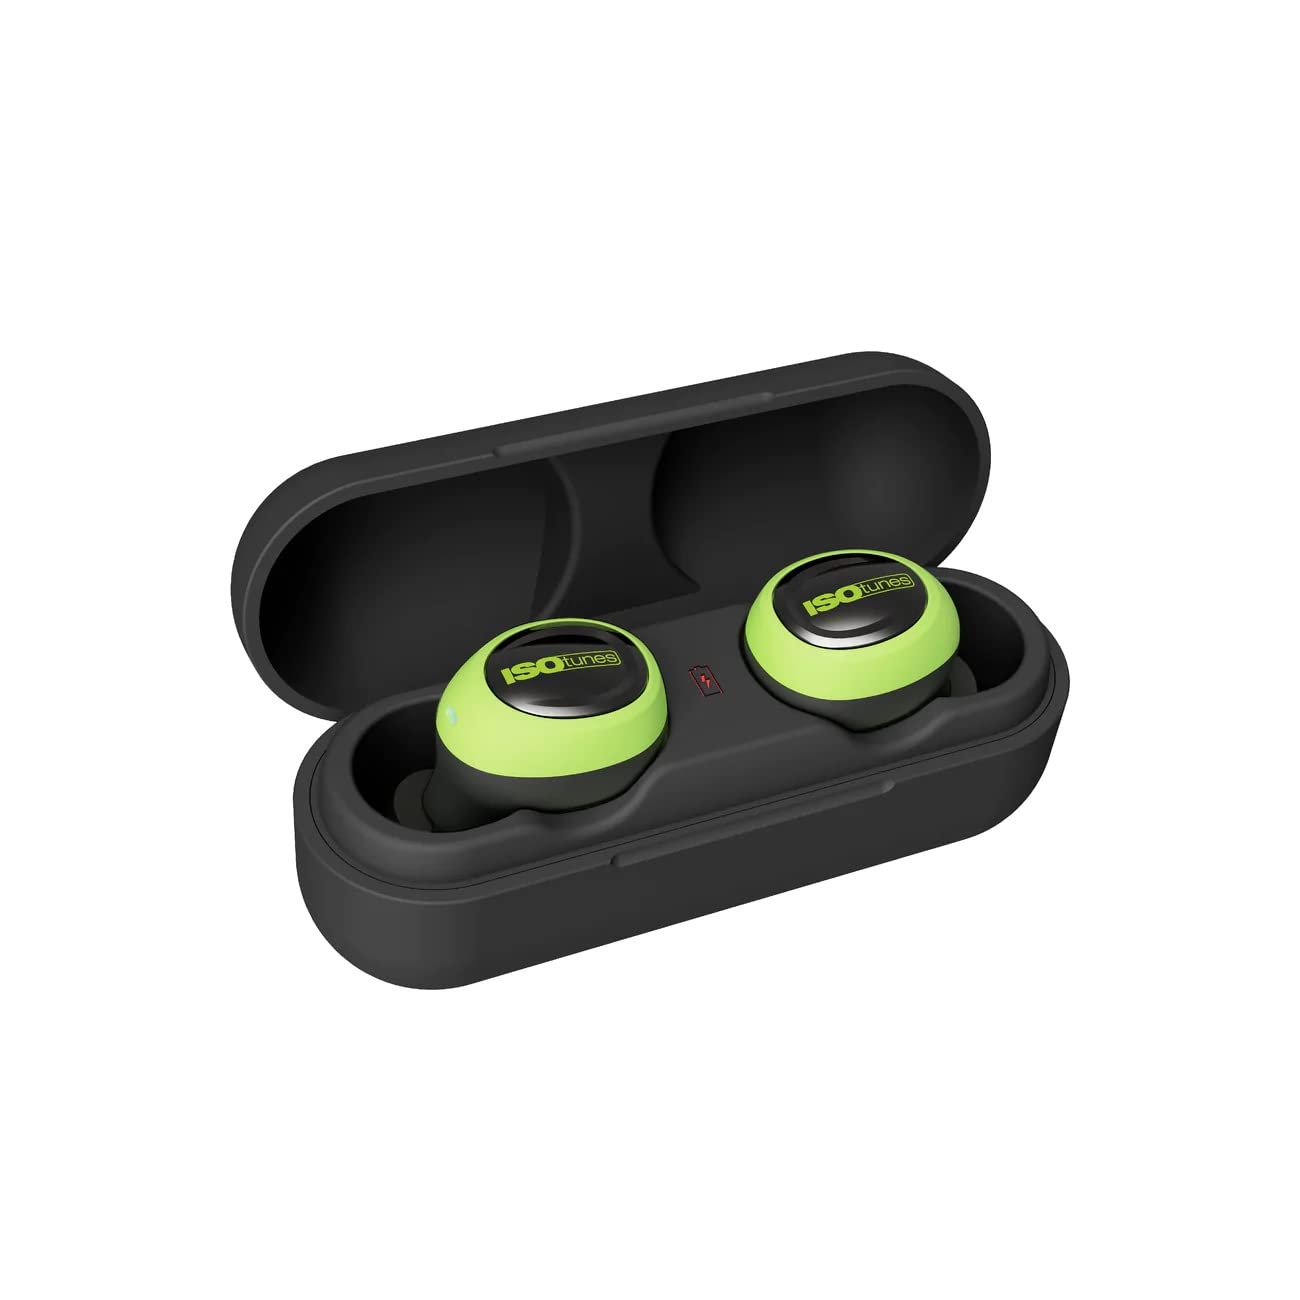 ISOtunes Free 2.0 True Wireless Earbuds: Improved 25 dB Noise Reduction Rating, 22 Hour Total Battery Life, Noise Cancelling Mic, OSHA Compliant Bluetooth Hearing Protector (Free 2.0 - Safety Green)